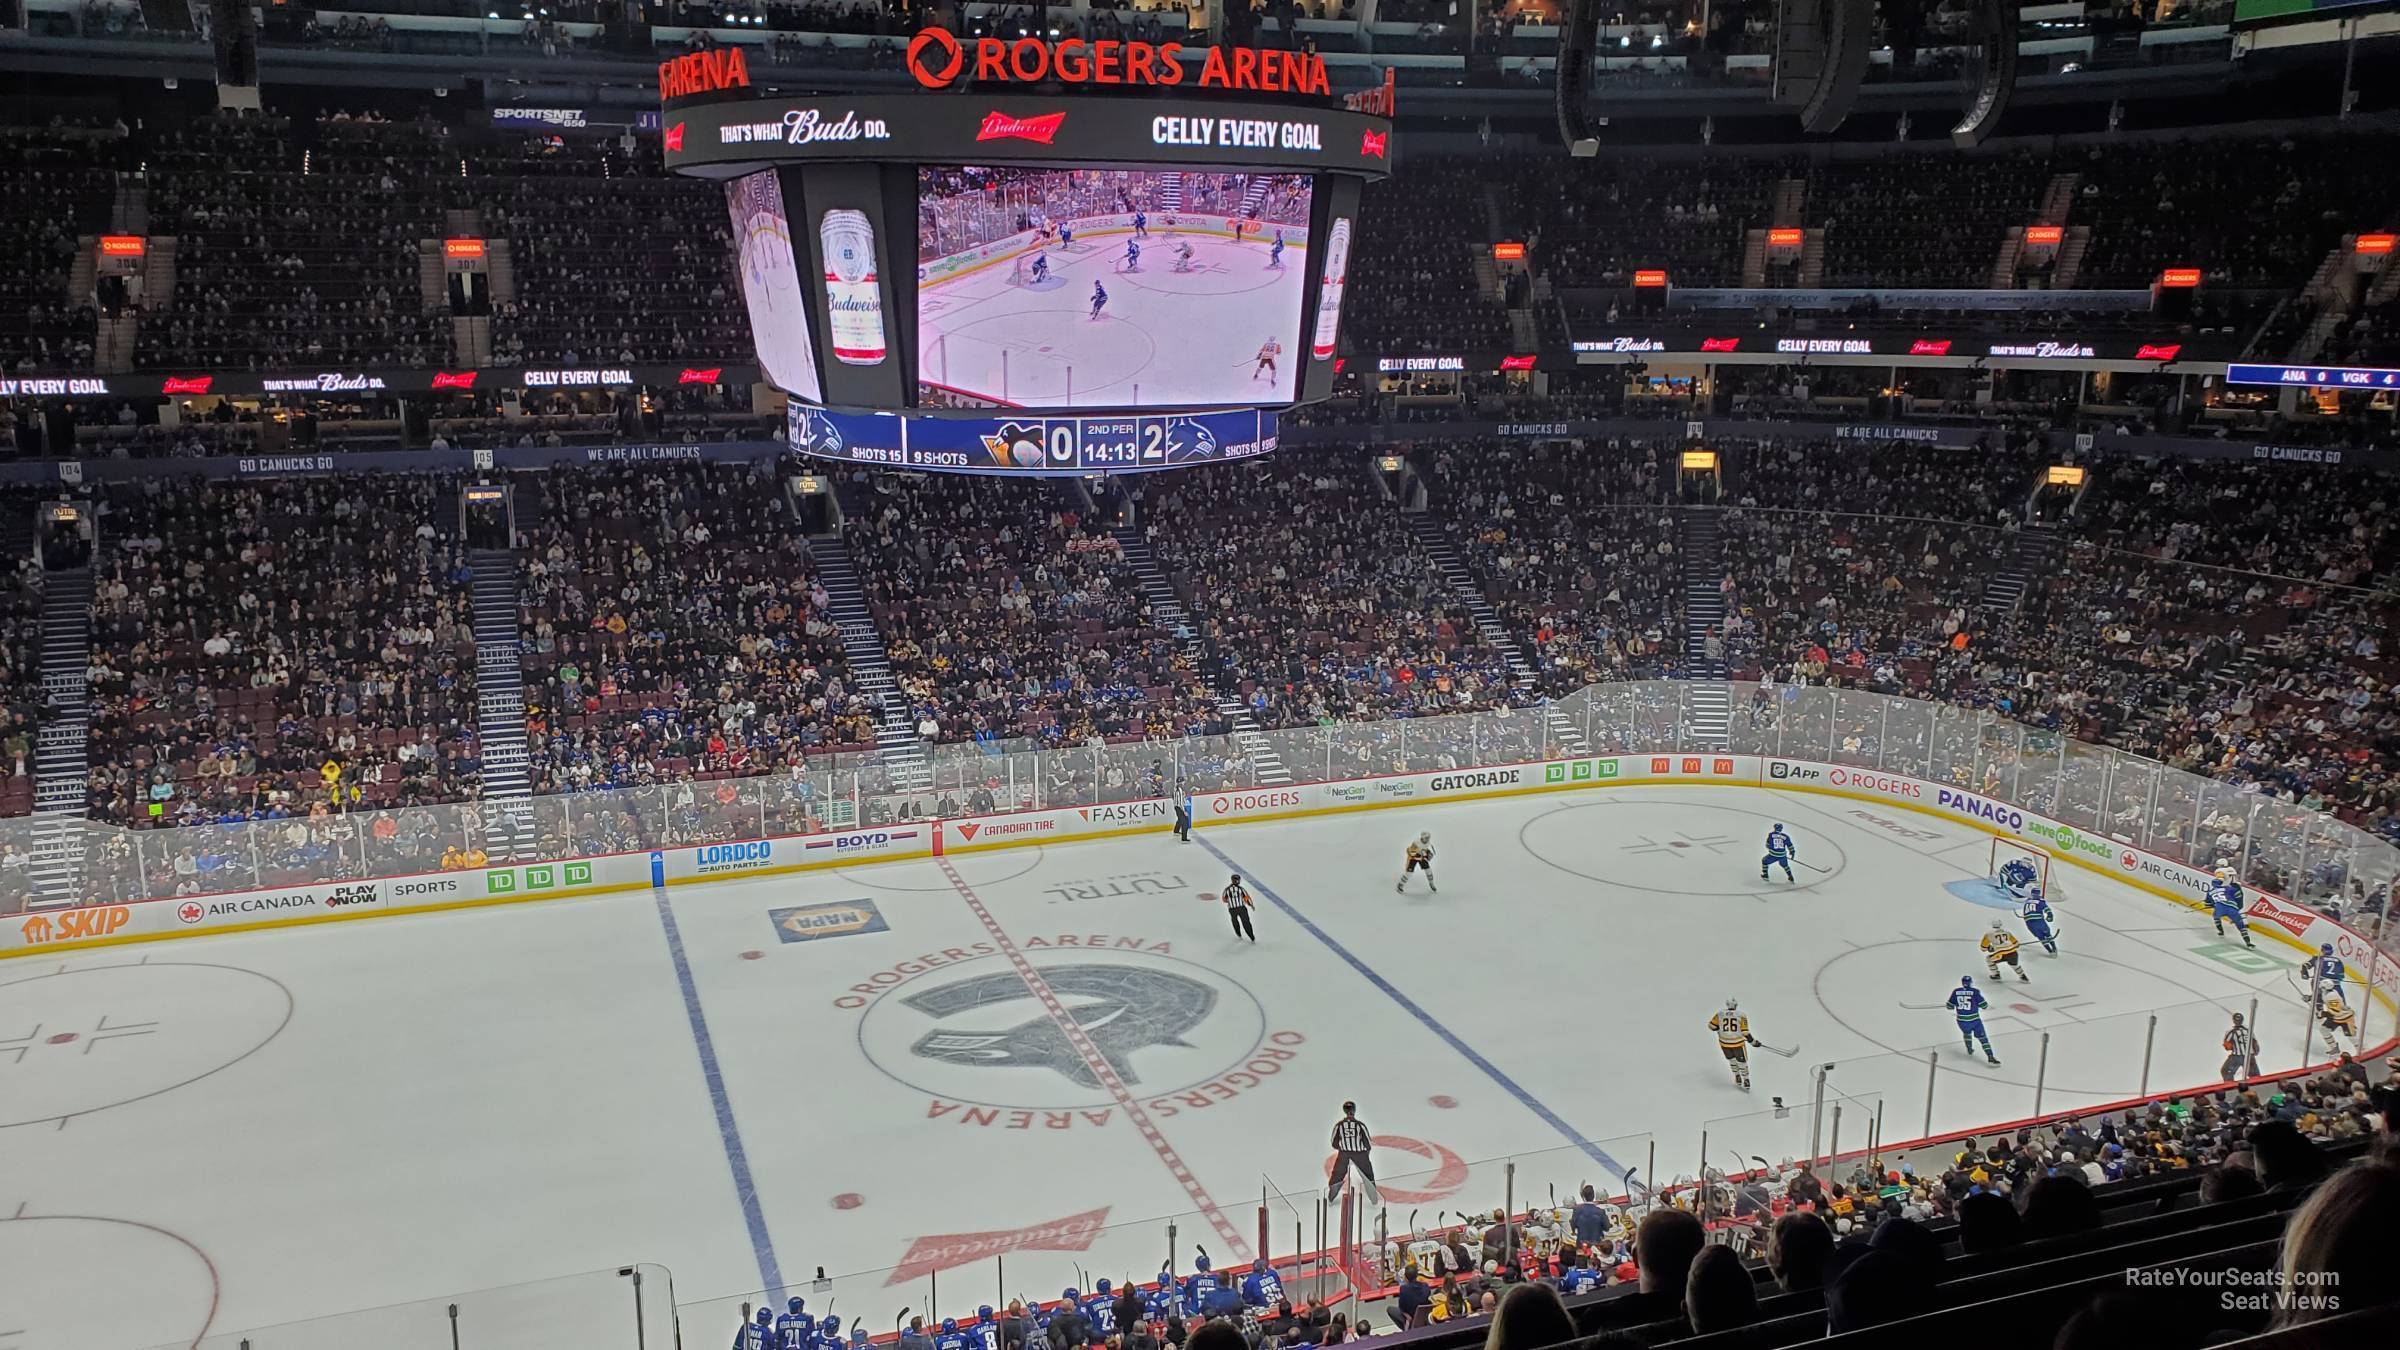 section 324, row 4 seat view  for hockey - rogers arena